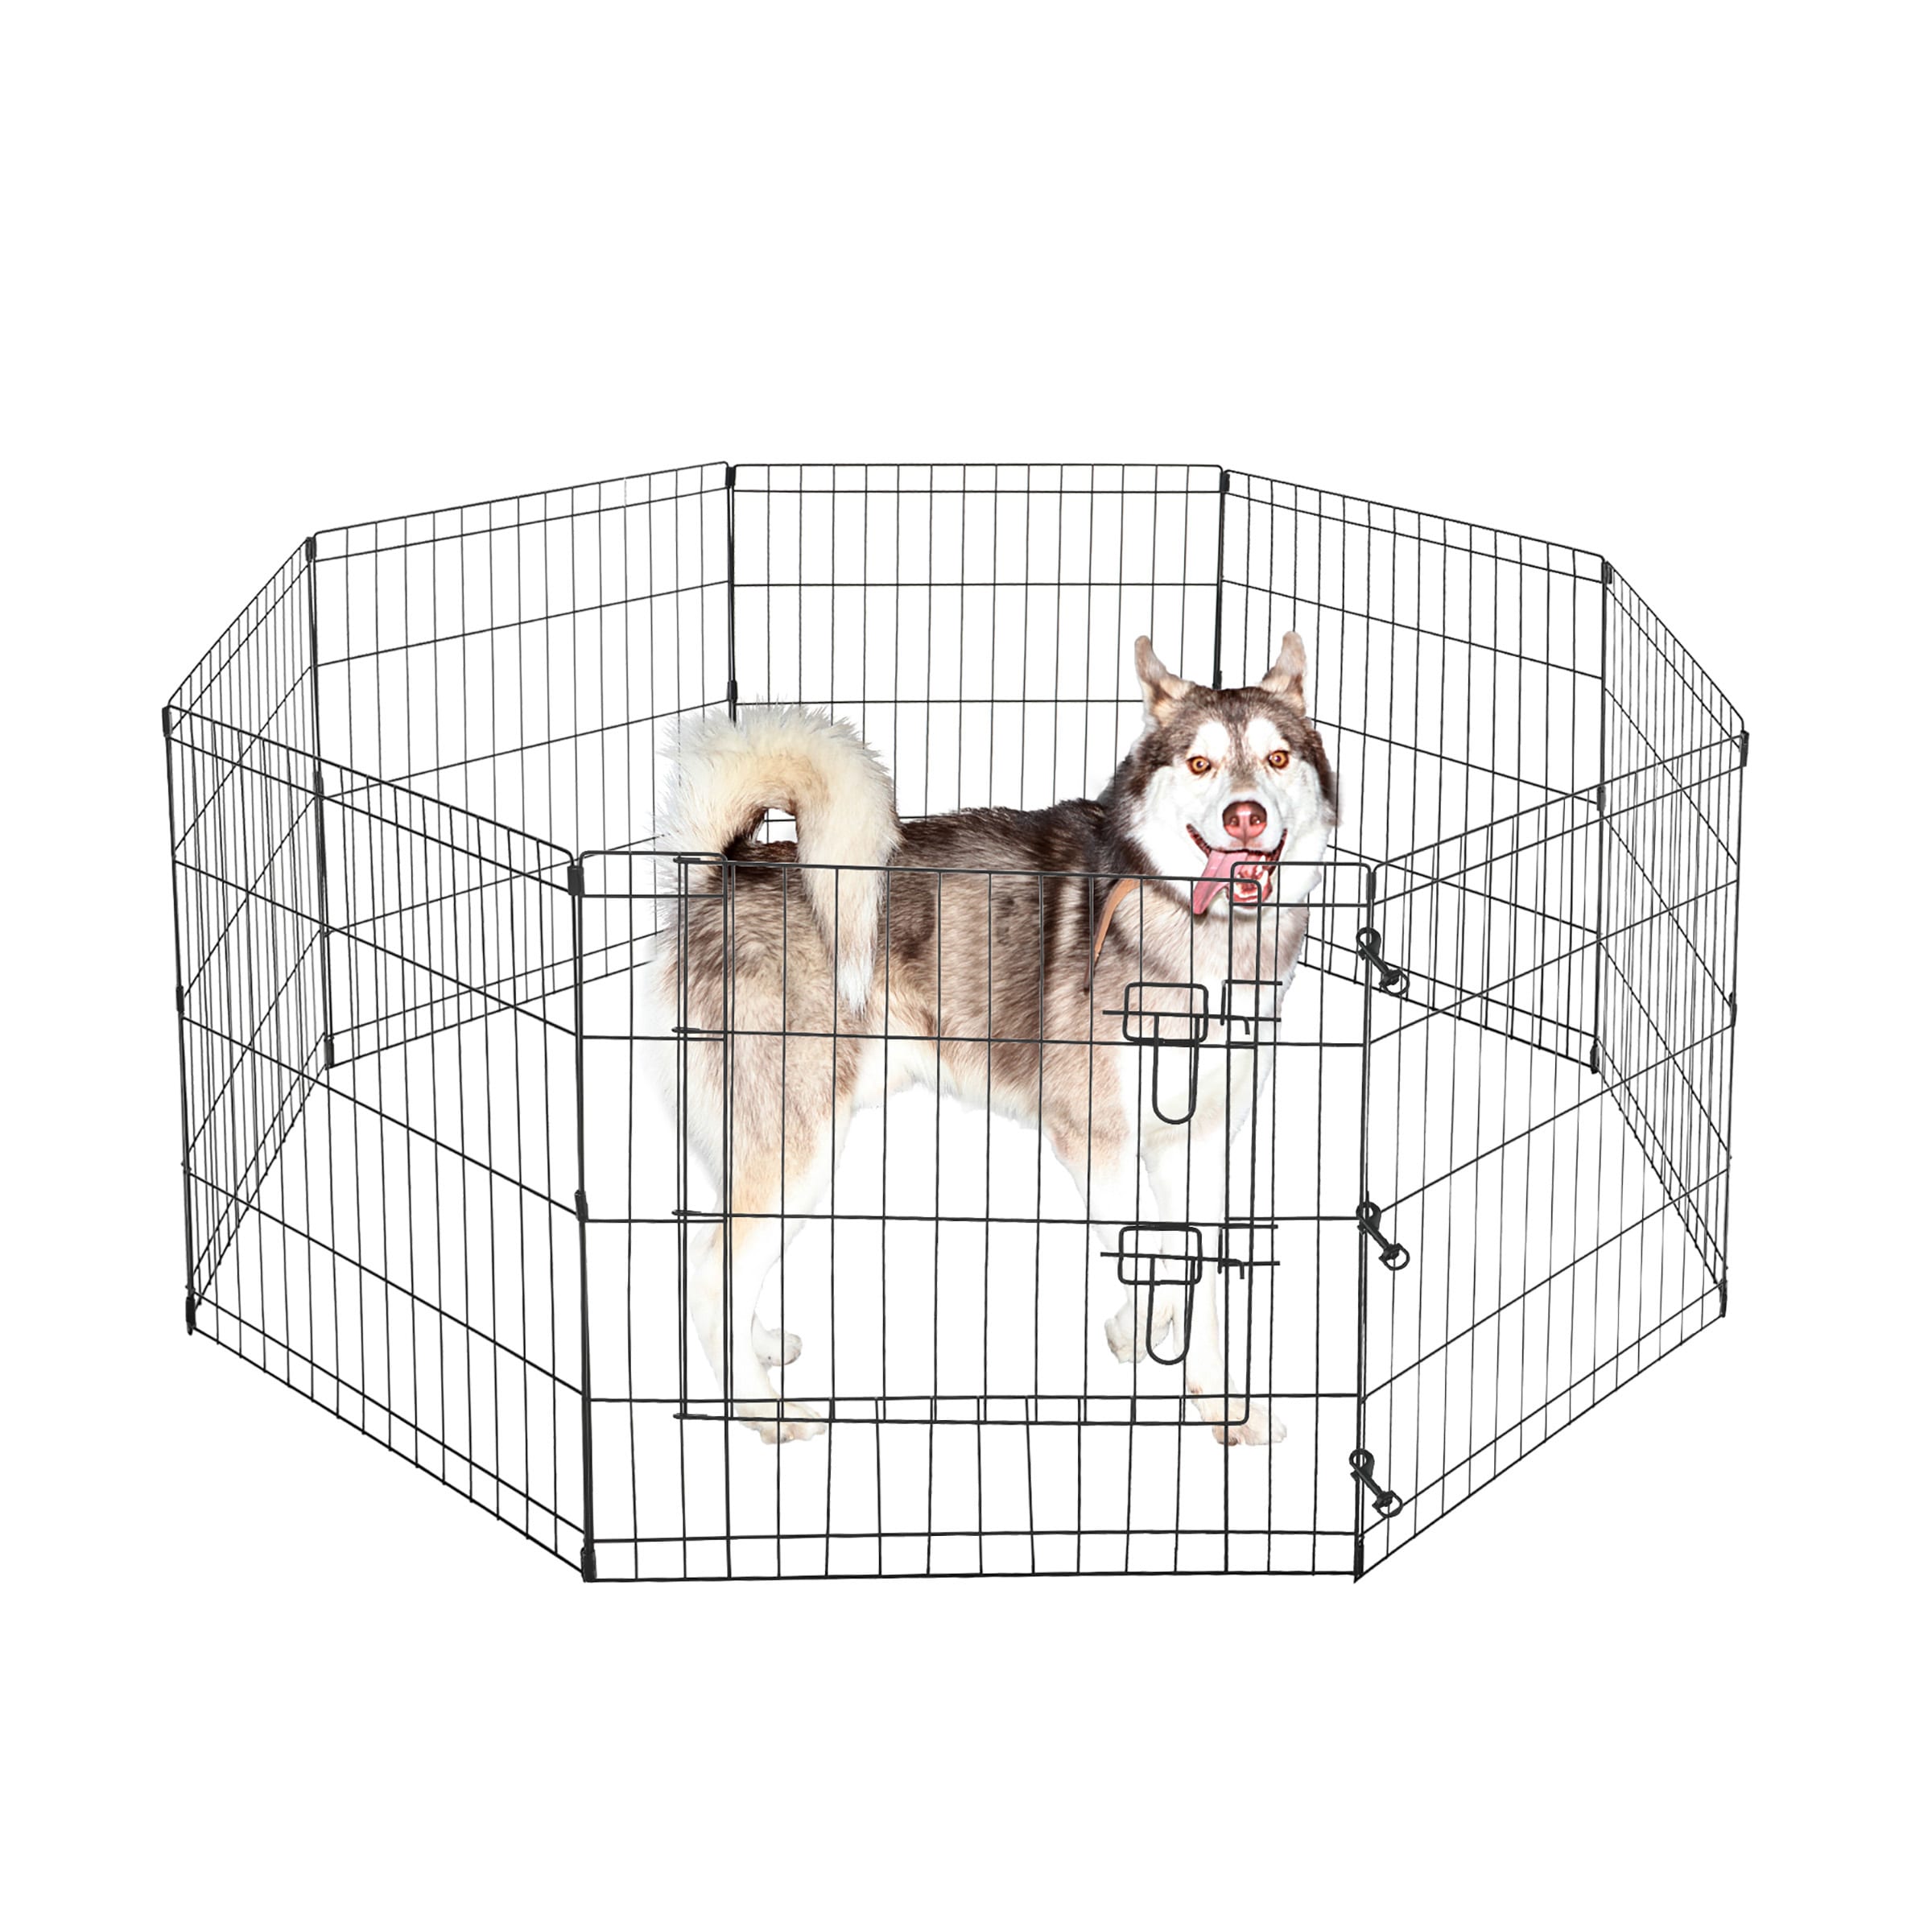 Collapsible Exercise Puppy Cat Playpen Dog Tent for Indoor Outdoor Use No Assembly Required WOWLAND Foldable Pet Playpen Portable Dog Playpen for Small Medium Dogs with Removable Mesh Cover 